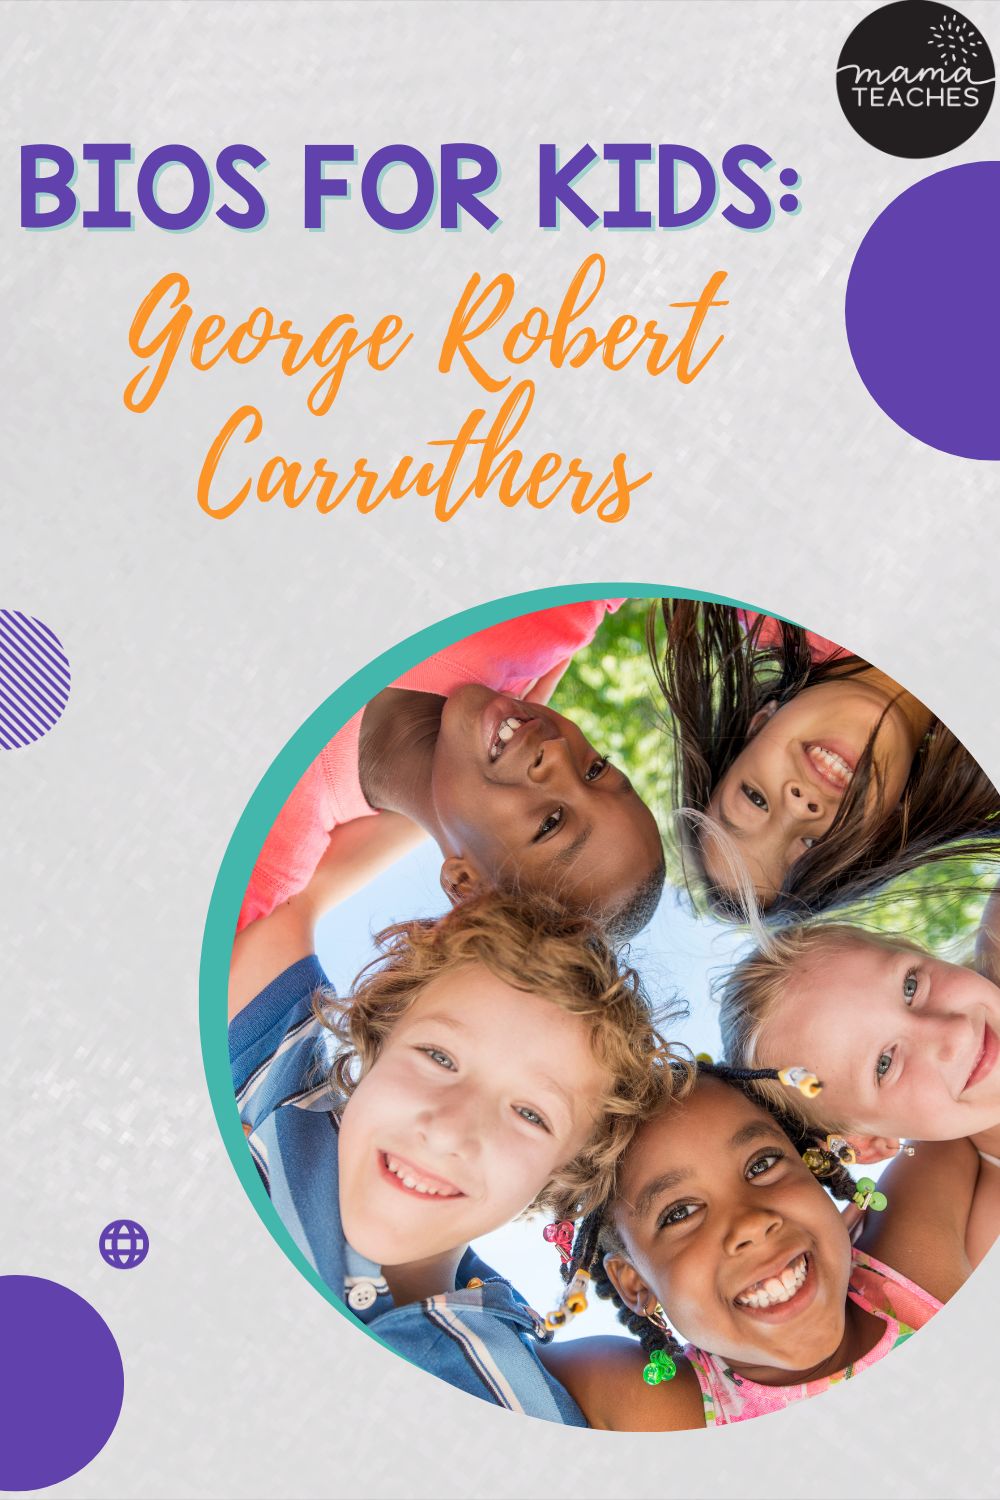 Bios for Kids George Robert Carruthers